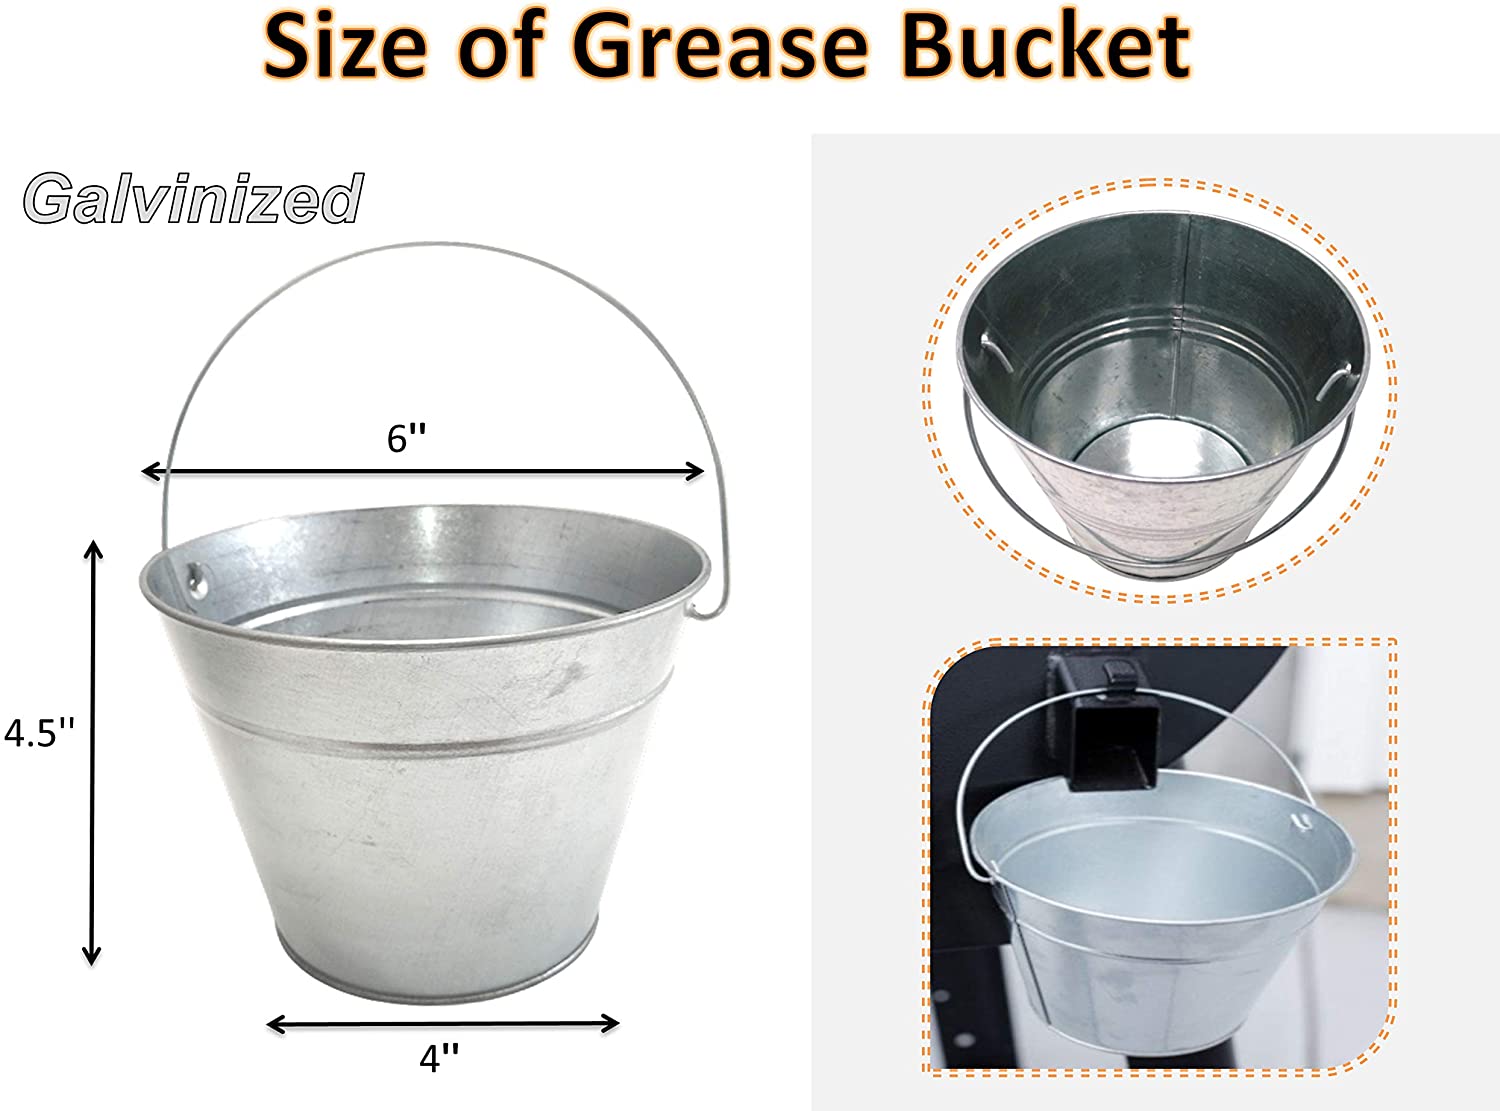 Dual Meat Probes,Grease Bucket and Disposable Foil Drip Liners Replacement for Camp Chef Wood Pellet Grills & Smoker